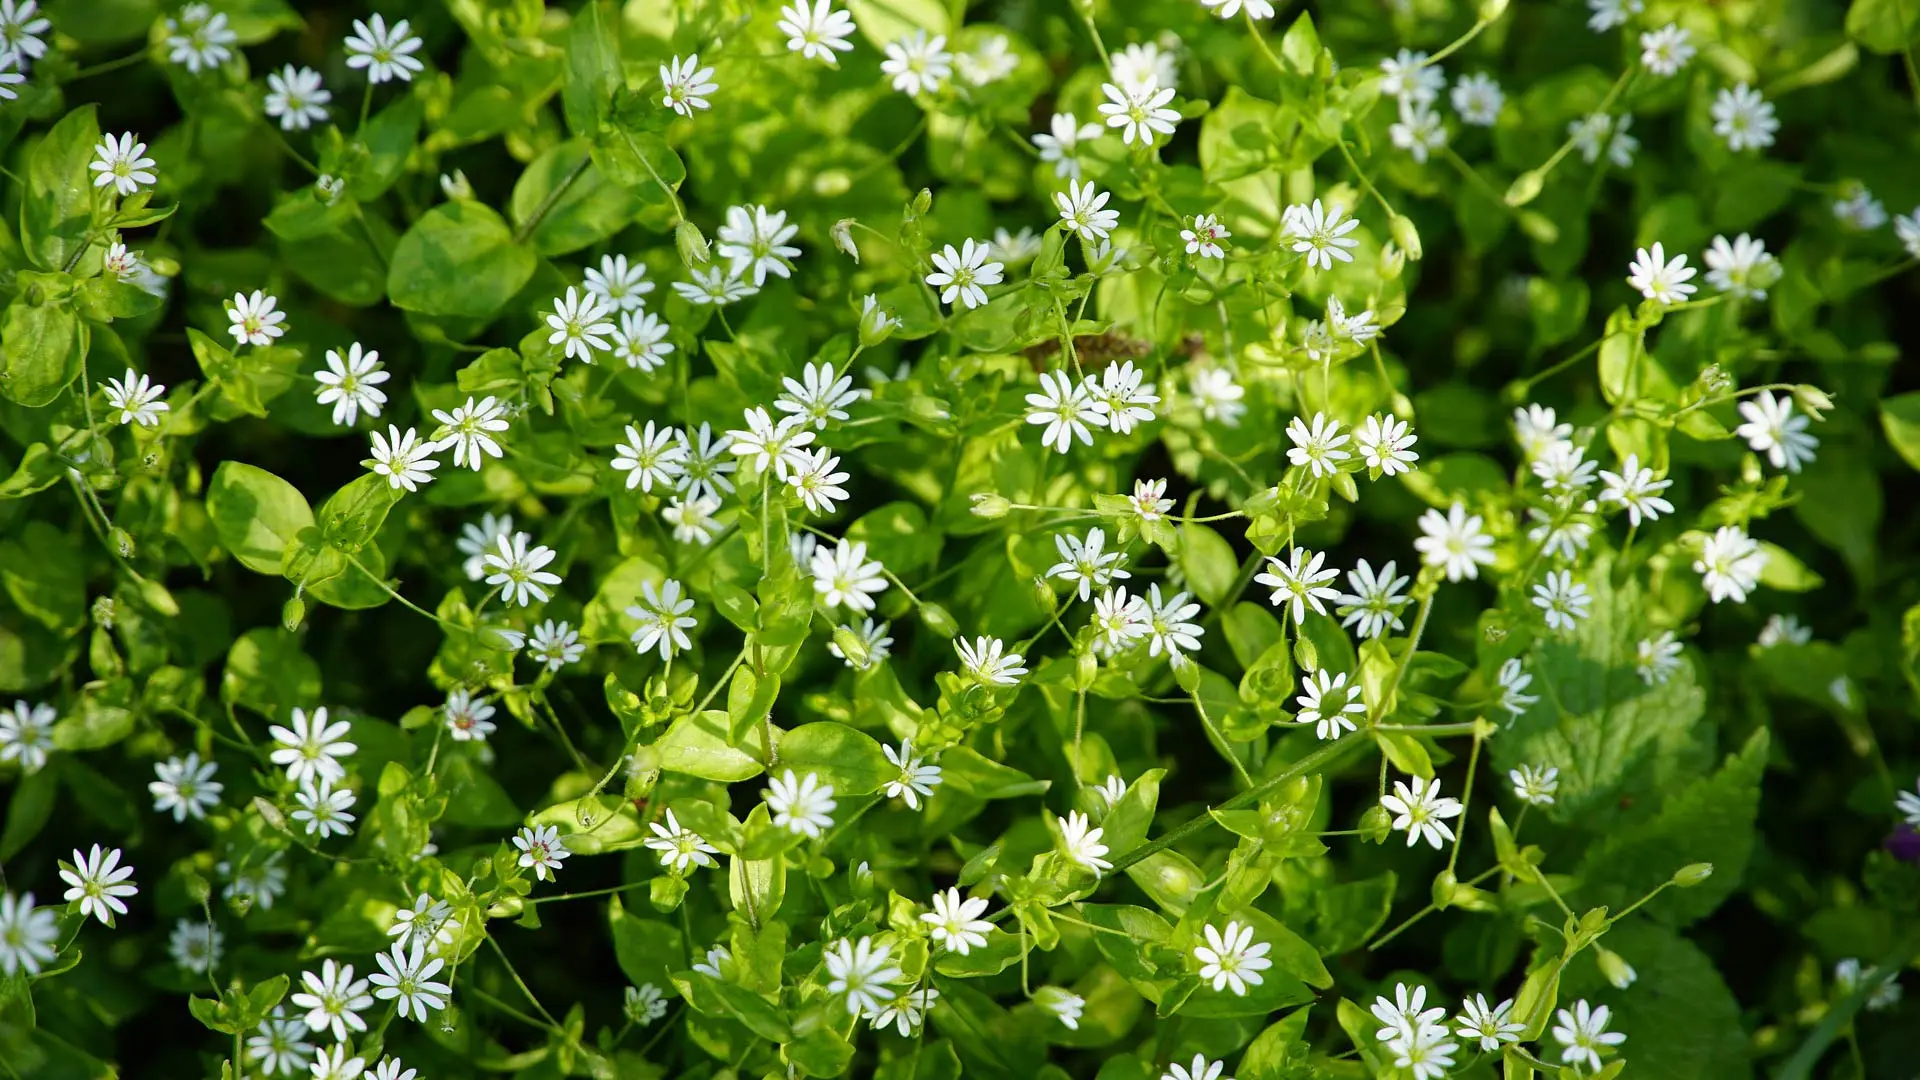 5 Weeds That Commonly Invade Lawns in North Carolina